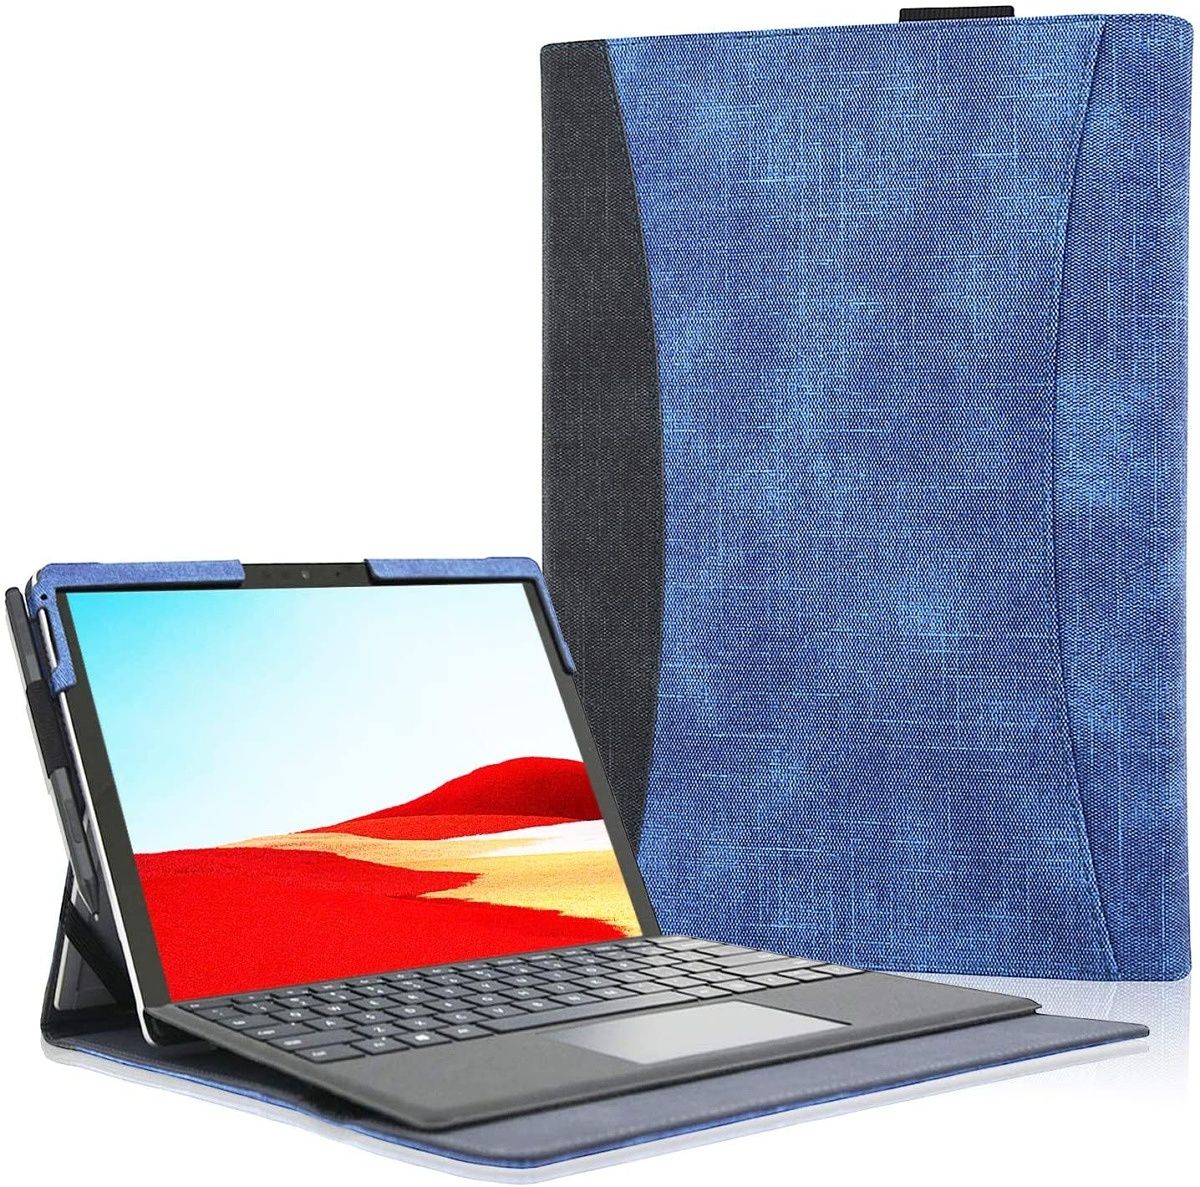 This is another folio-type cover that wraps around your Surface Pro X. The exterior is fabric, and it has cutouts for the ports and cameras, plus a loop for the Surface Pen. You can get it in a few different colors, which is nice if you want something a bit more personal.